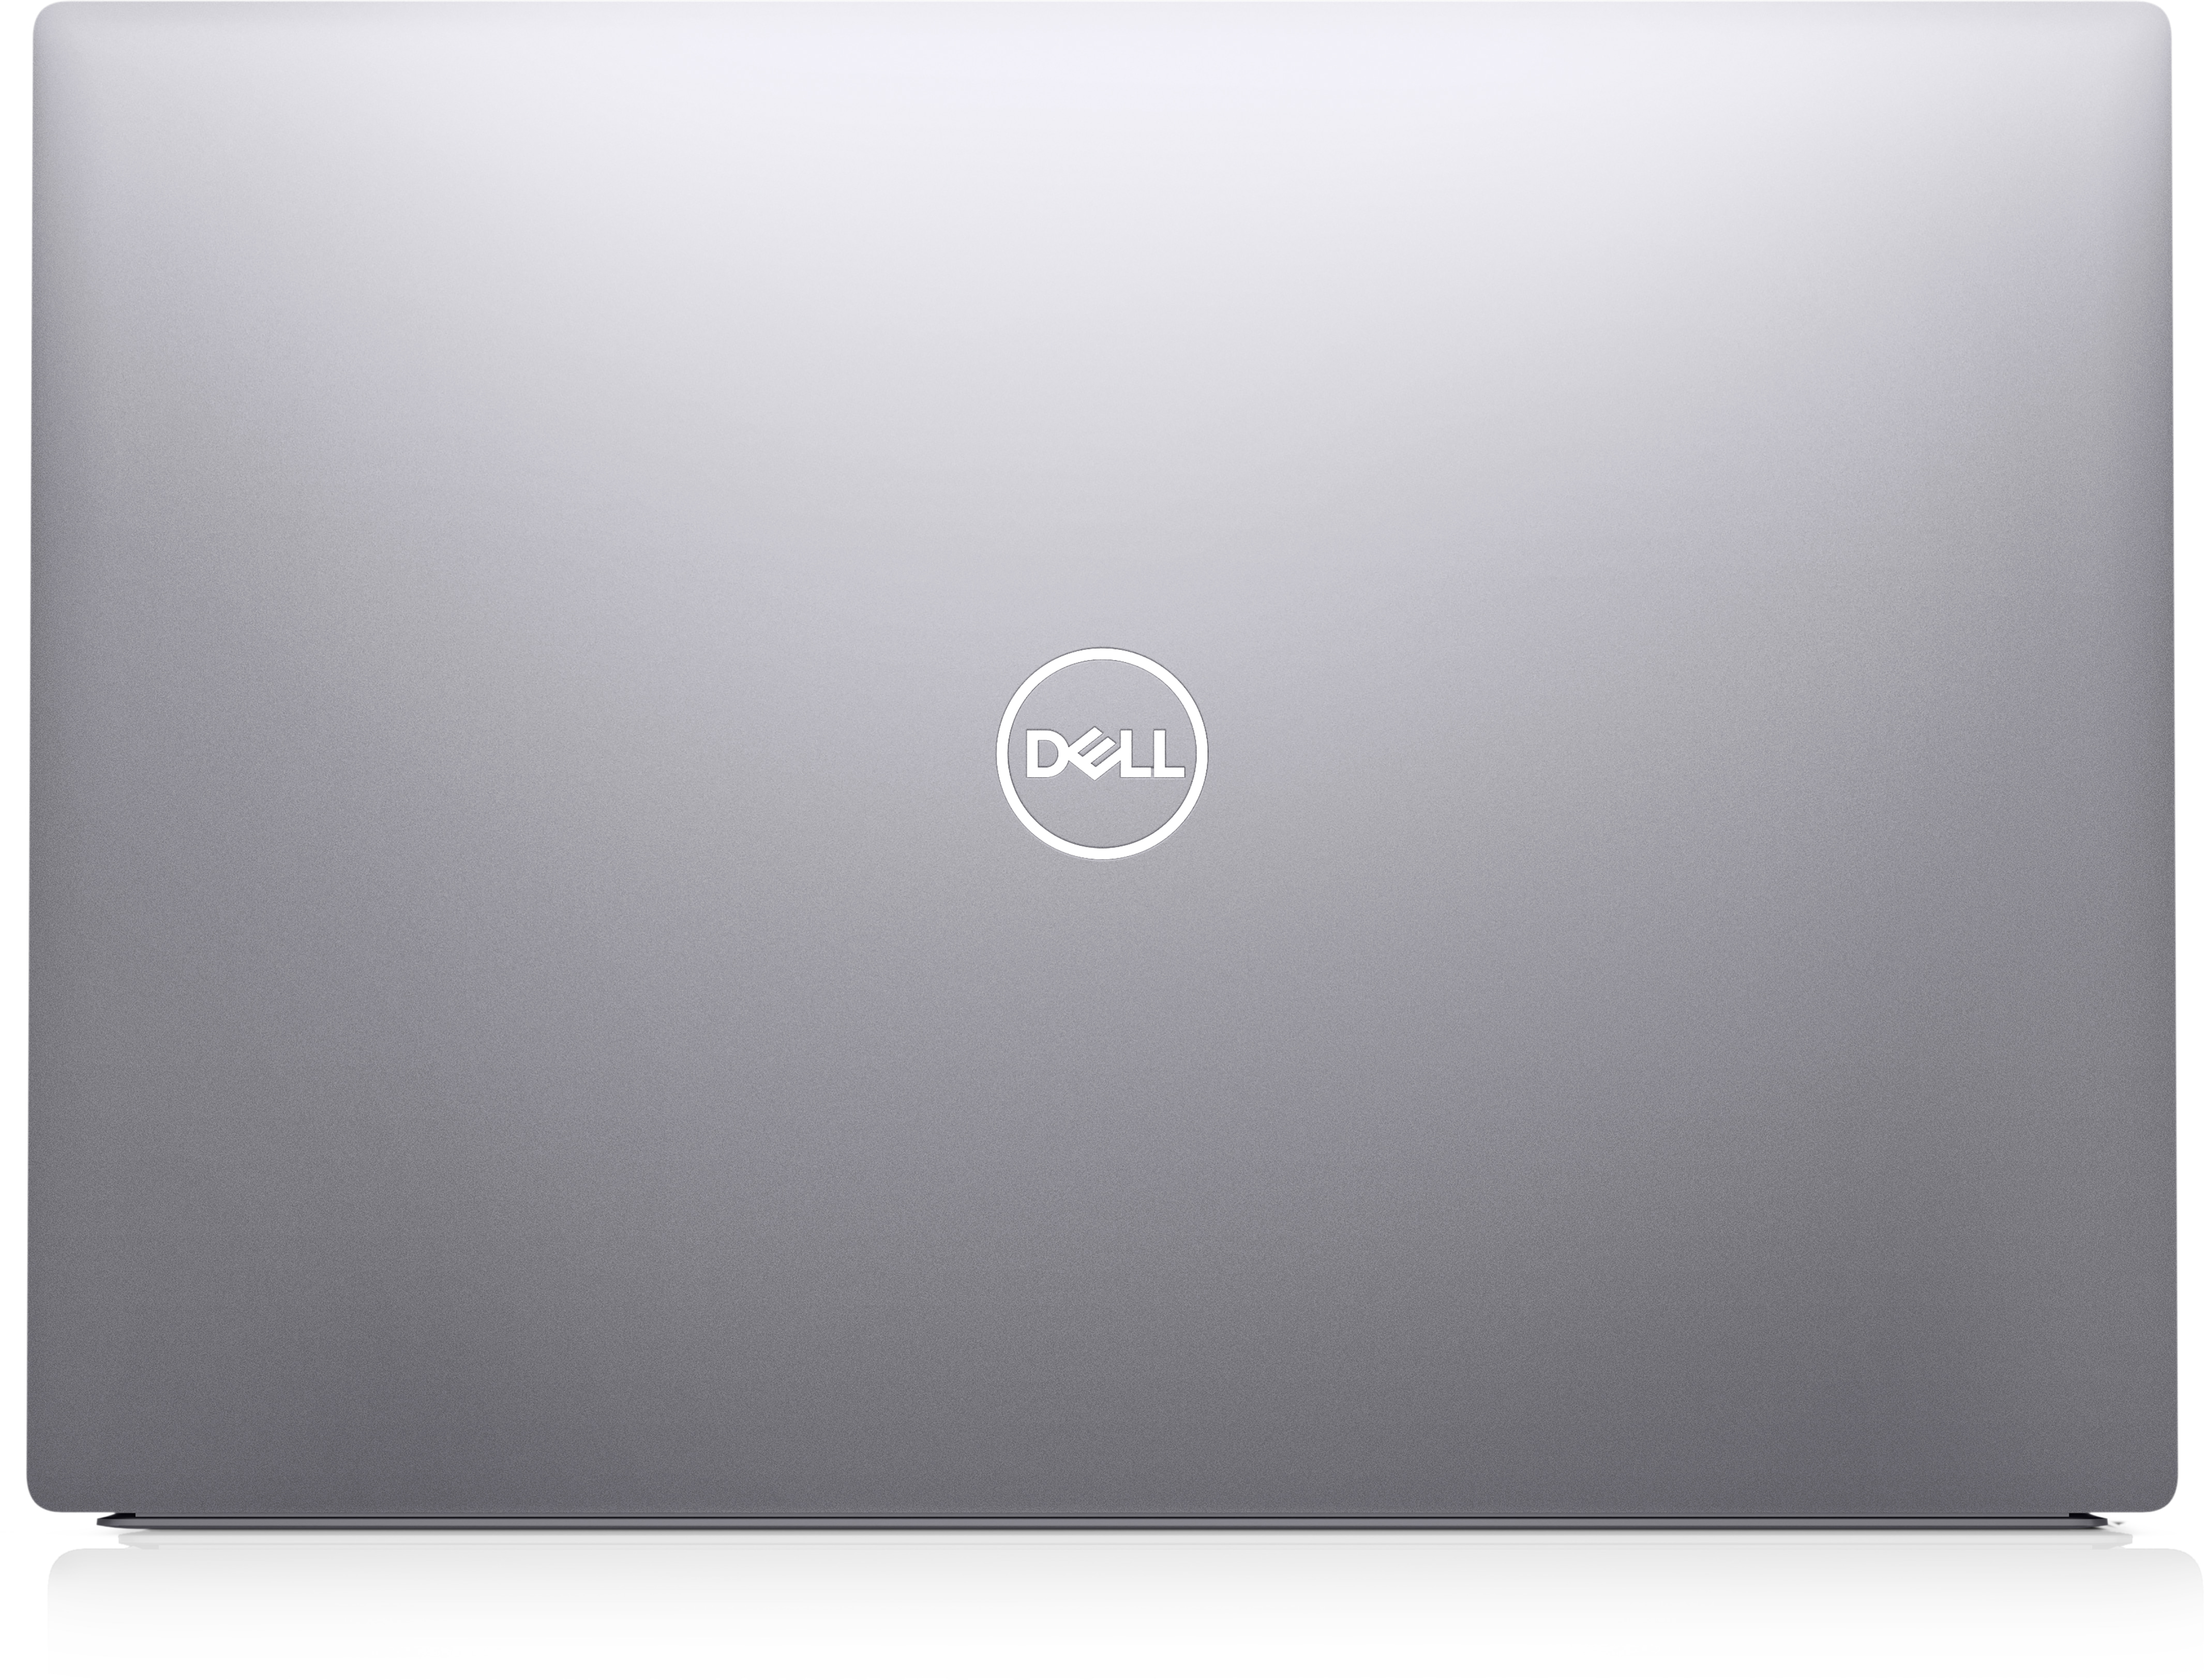 Vostro 16 Inch Laptop - Computer Laptops | Dell USA